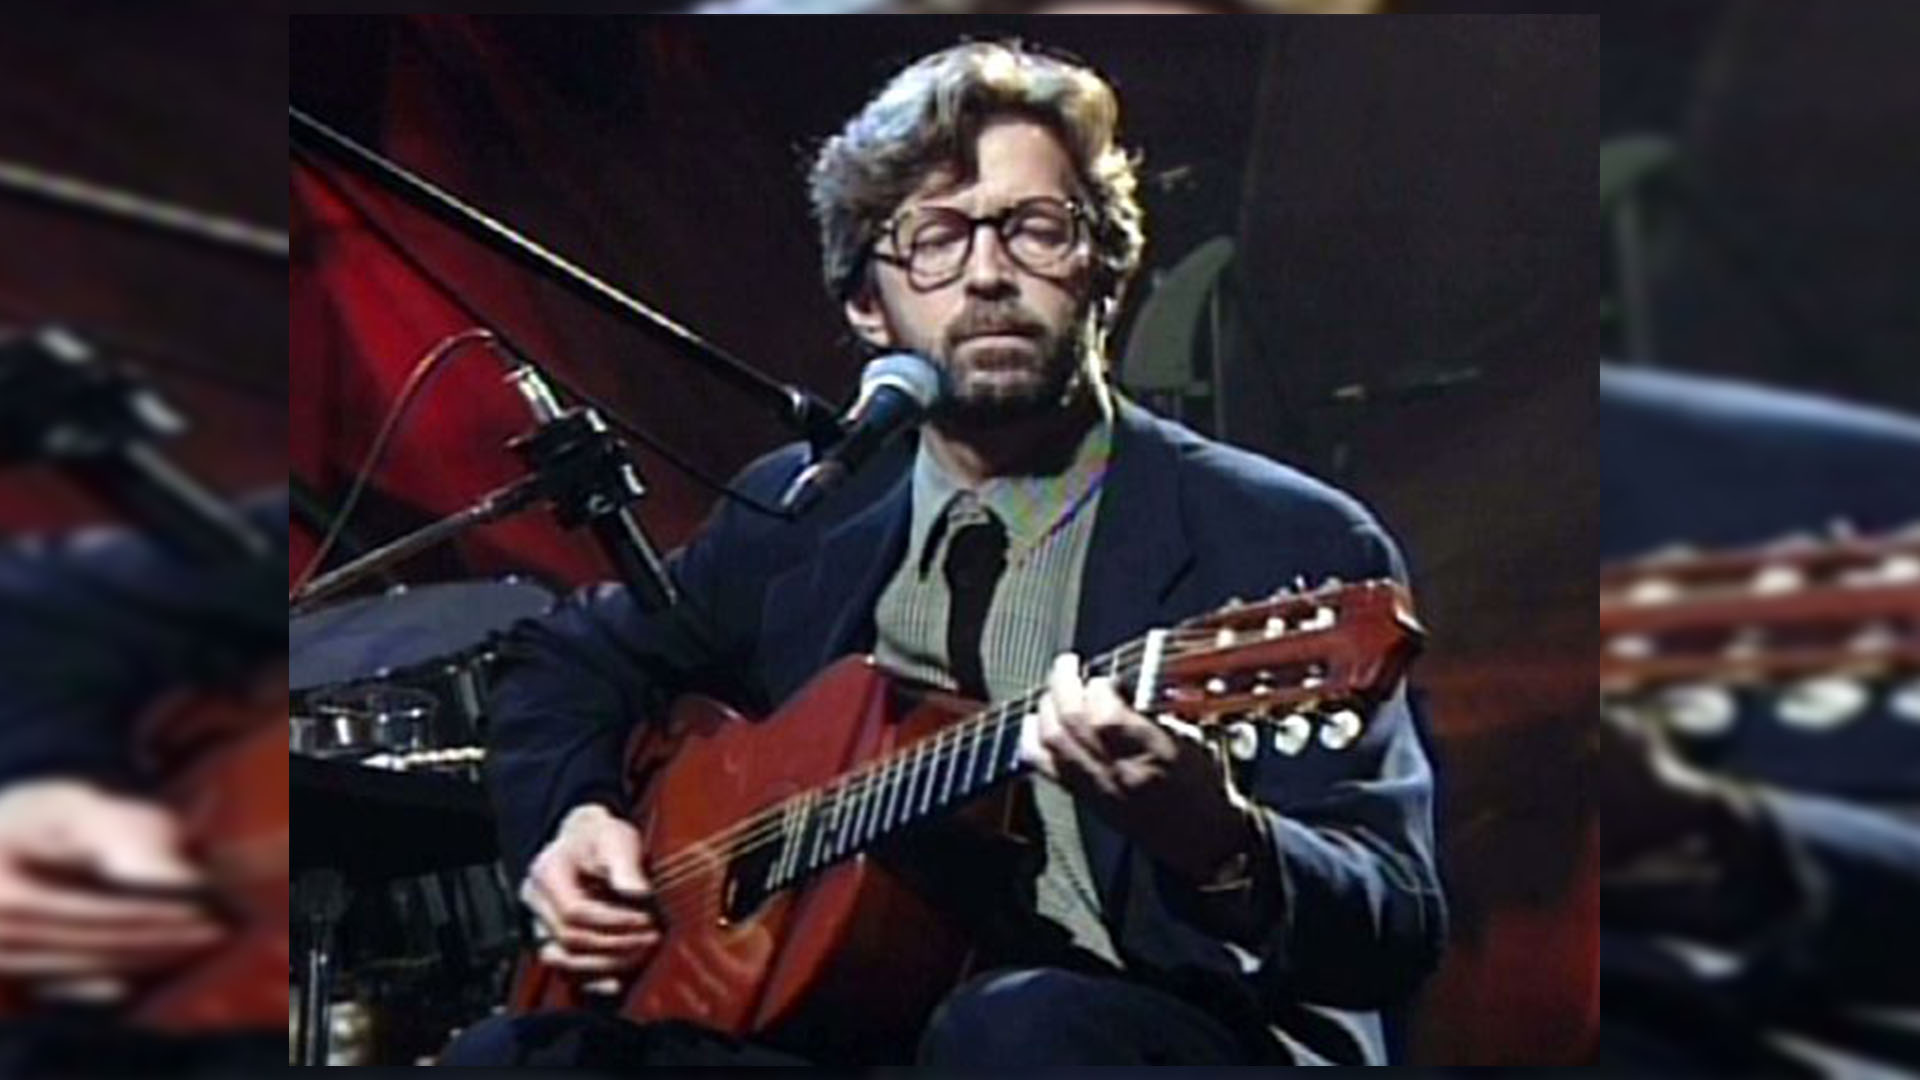 Watch: Eric Clapton under fire after anti-vaccine song release